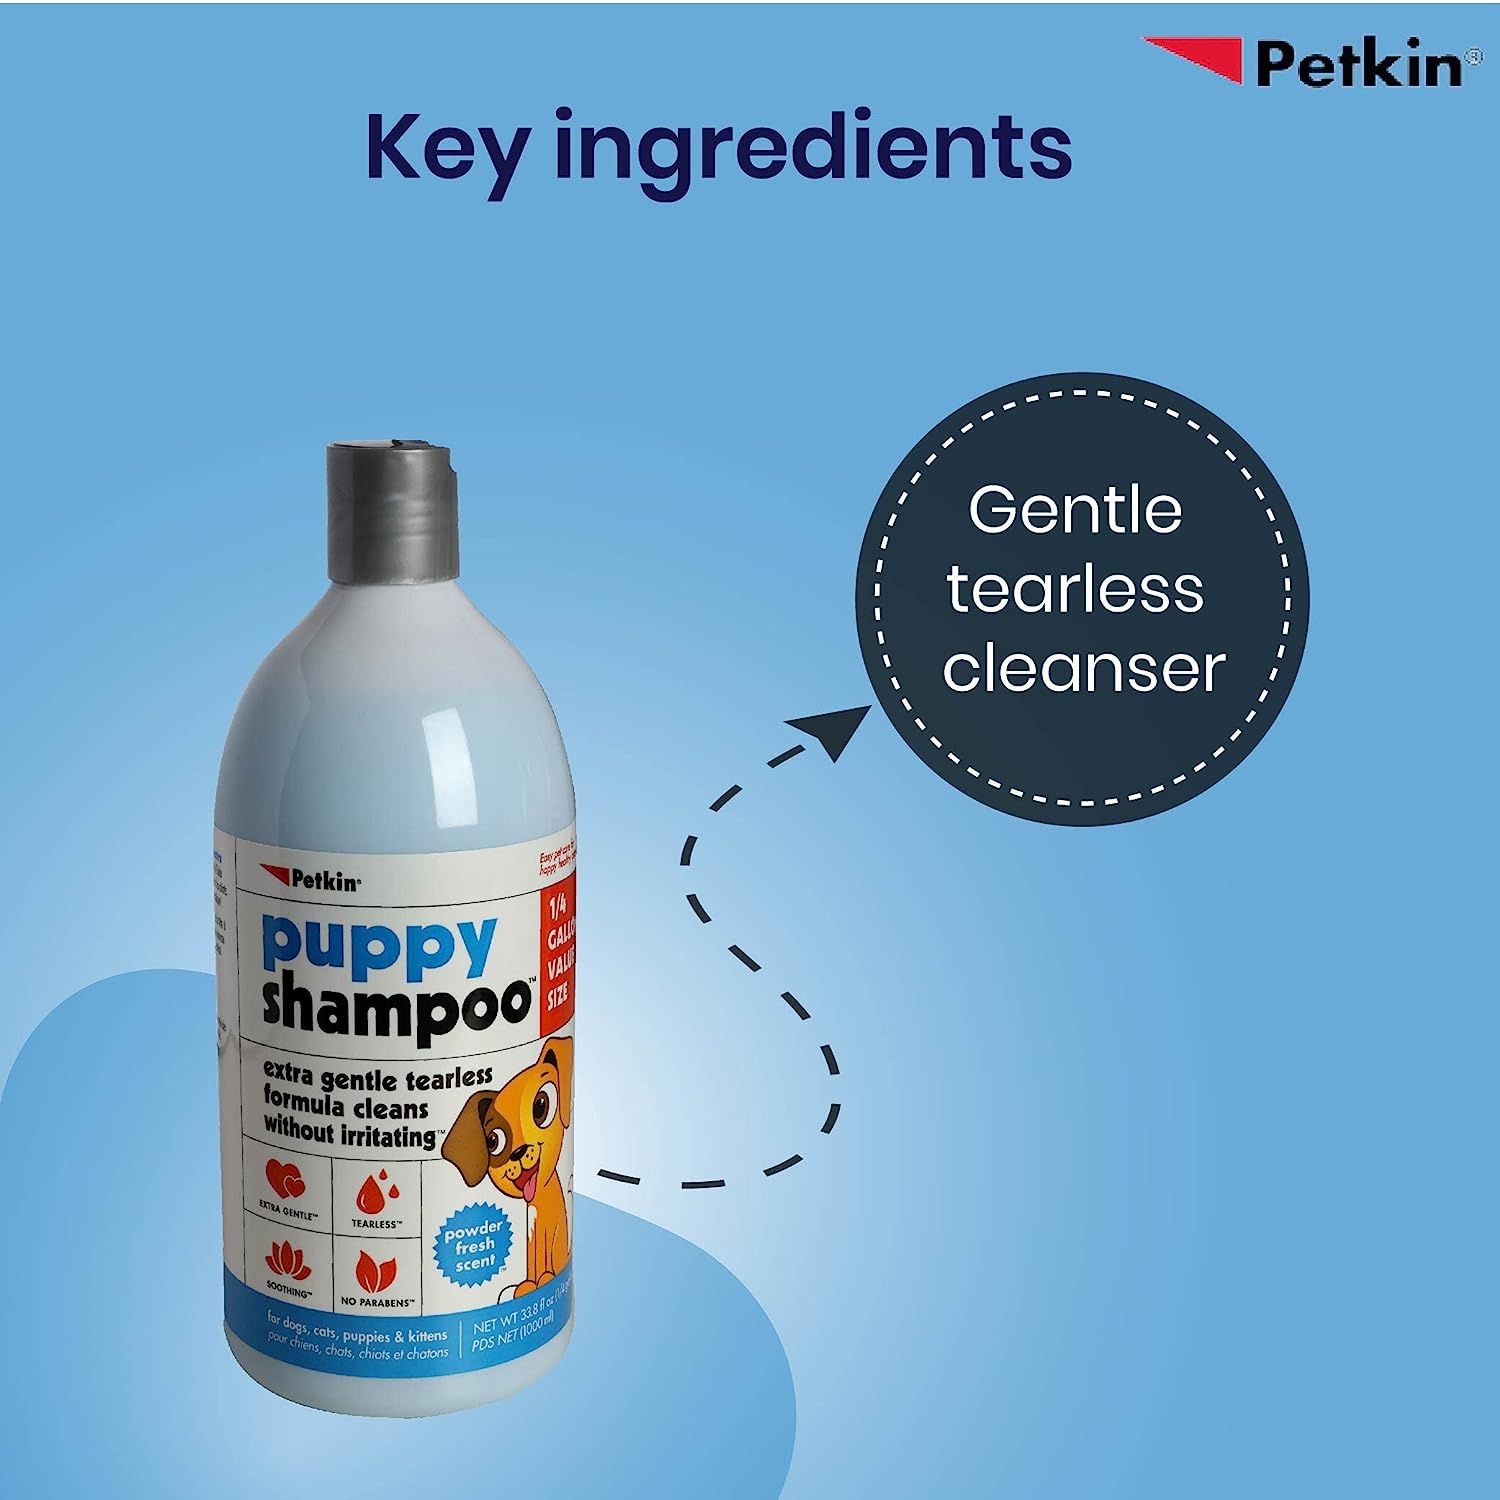 Petkin Puppy Shampoo Cleans Your Pet with an Extra Gentle and Tearless Formula Designed Especially for Puppies. Leaves Coat Soft, Smelling Powder Fresh and Feeling Great - 1000ml…